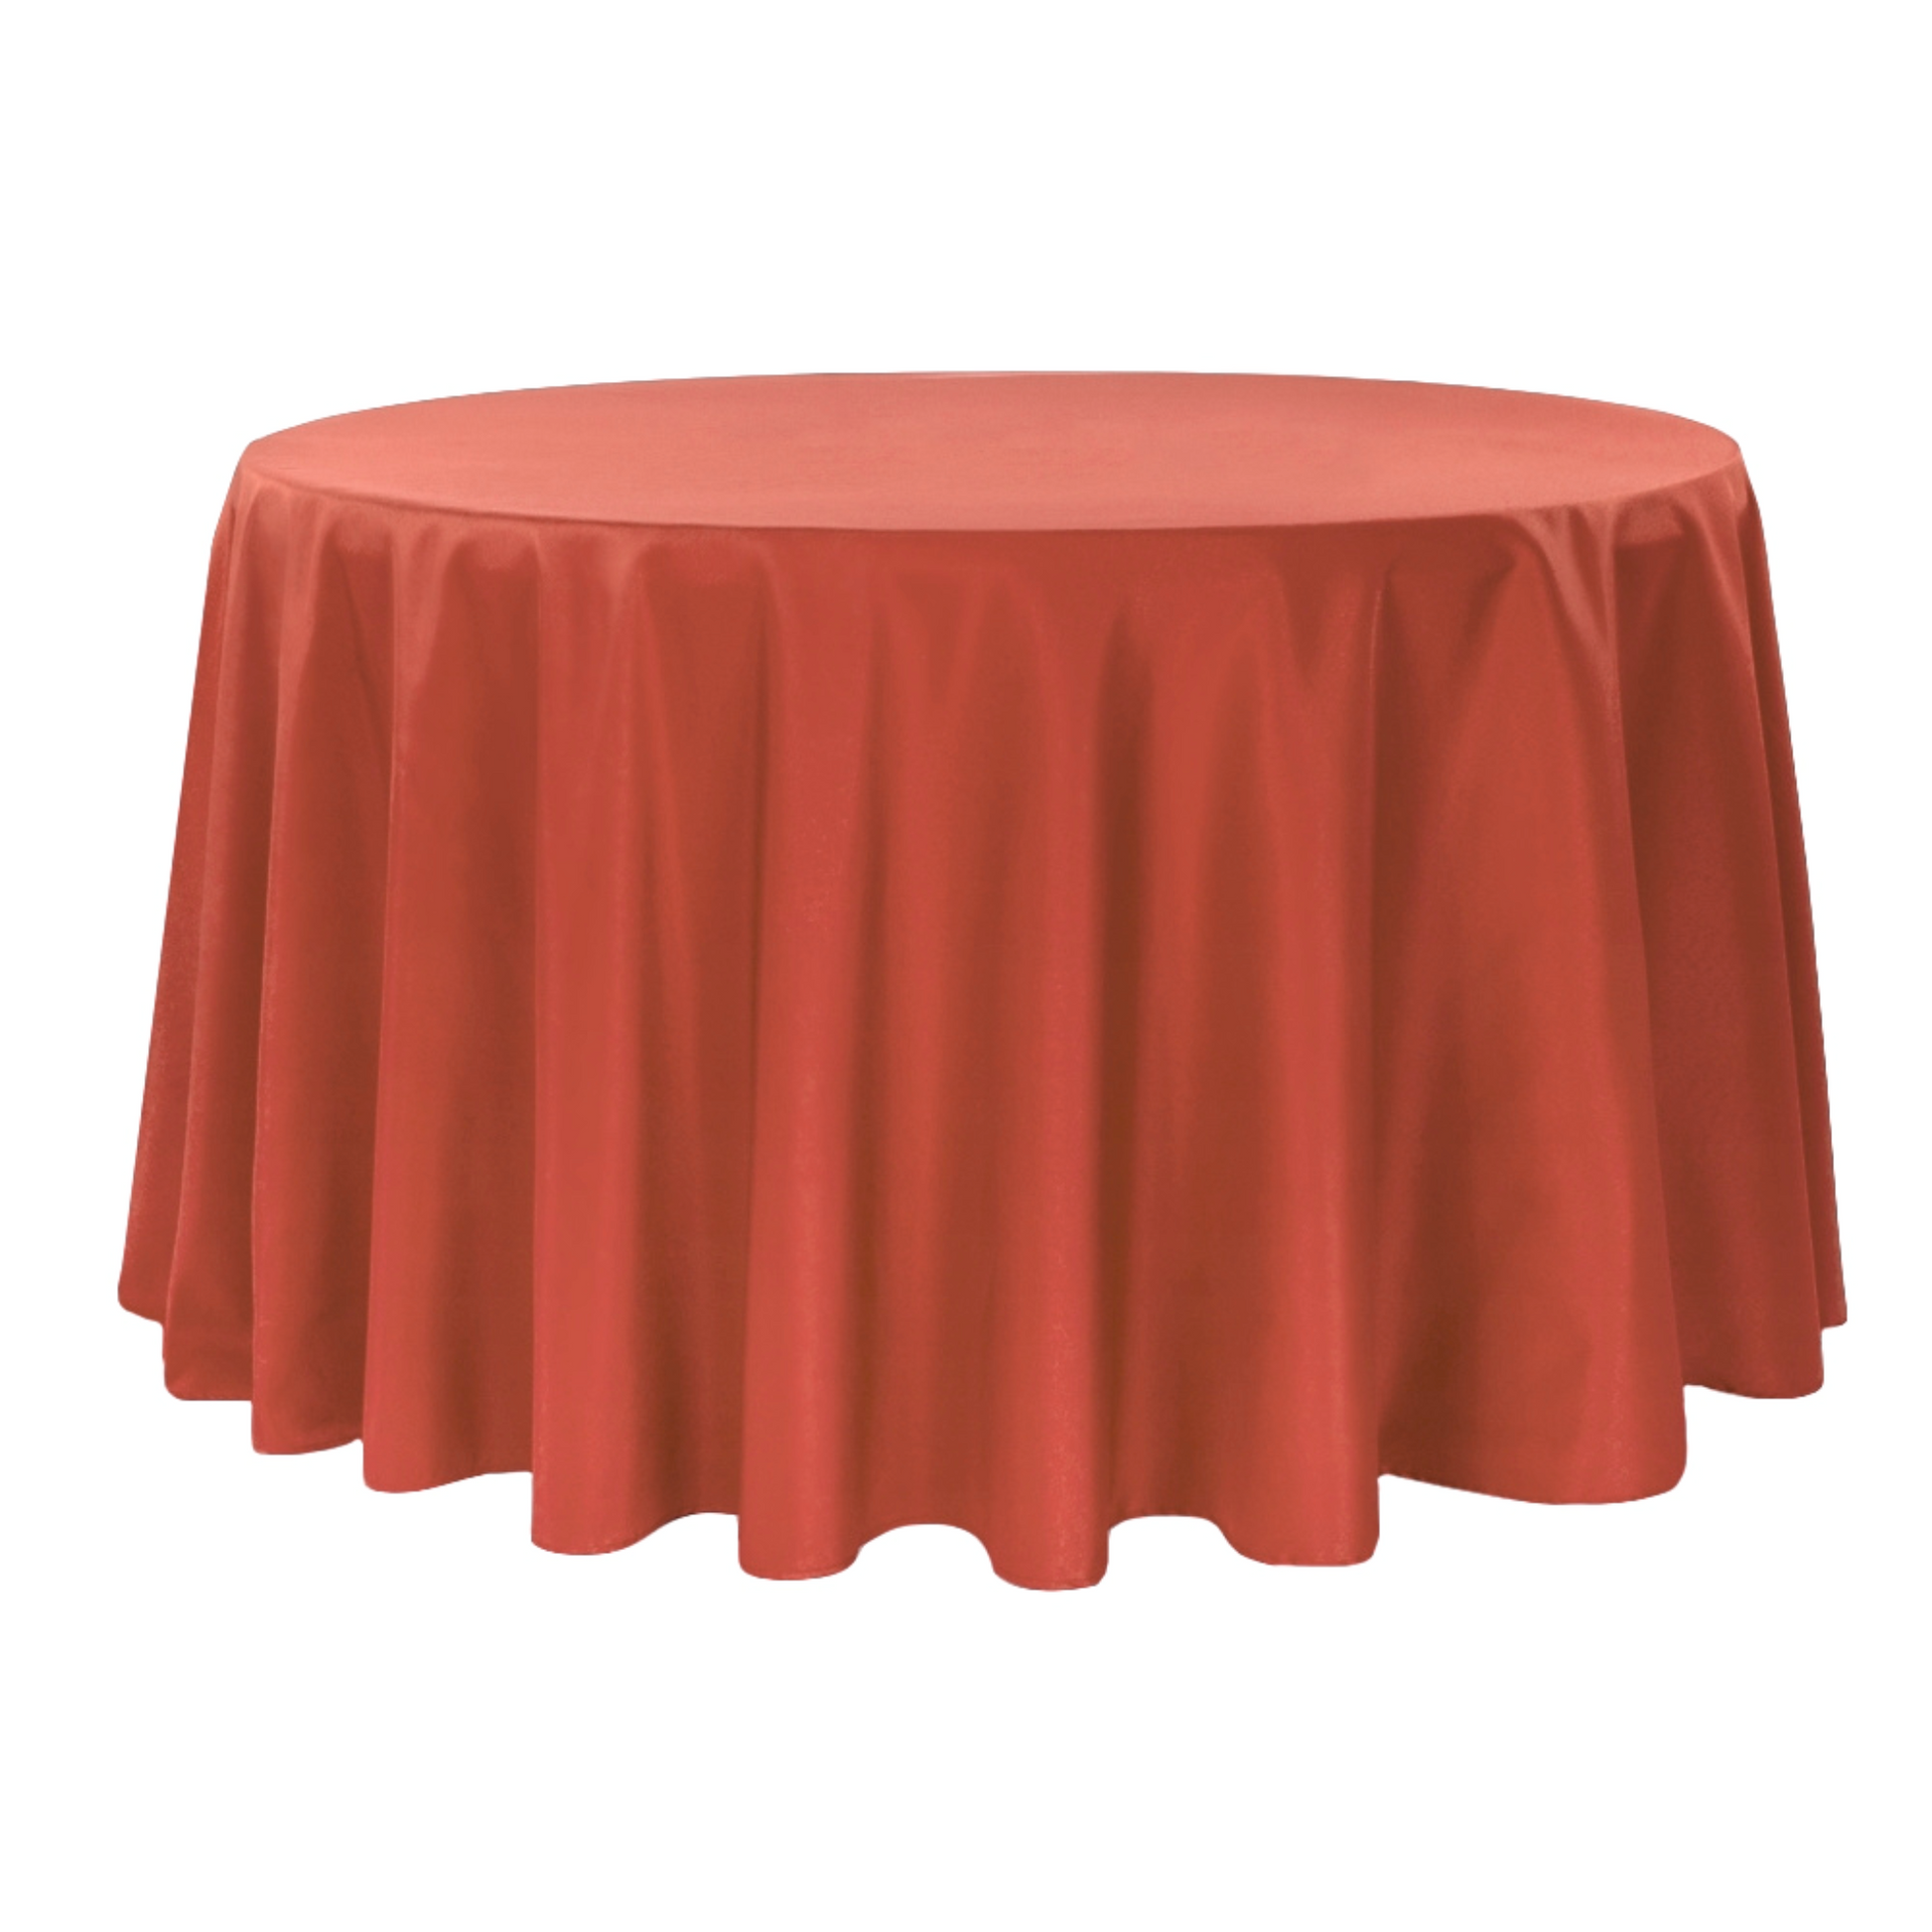 Polyester 120" Round Tablecloth - Rust